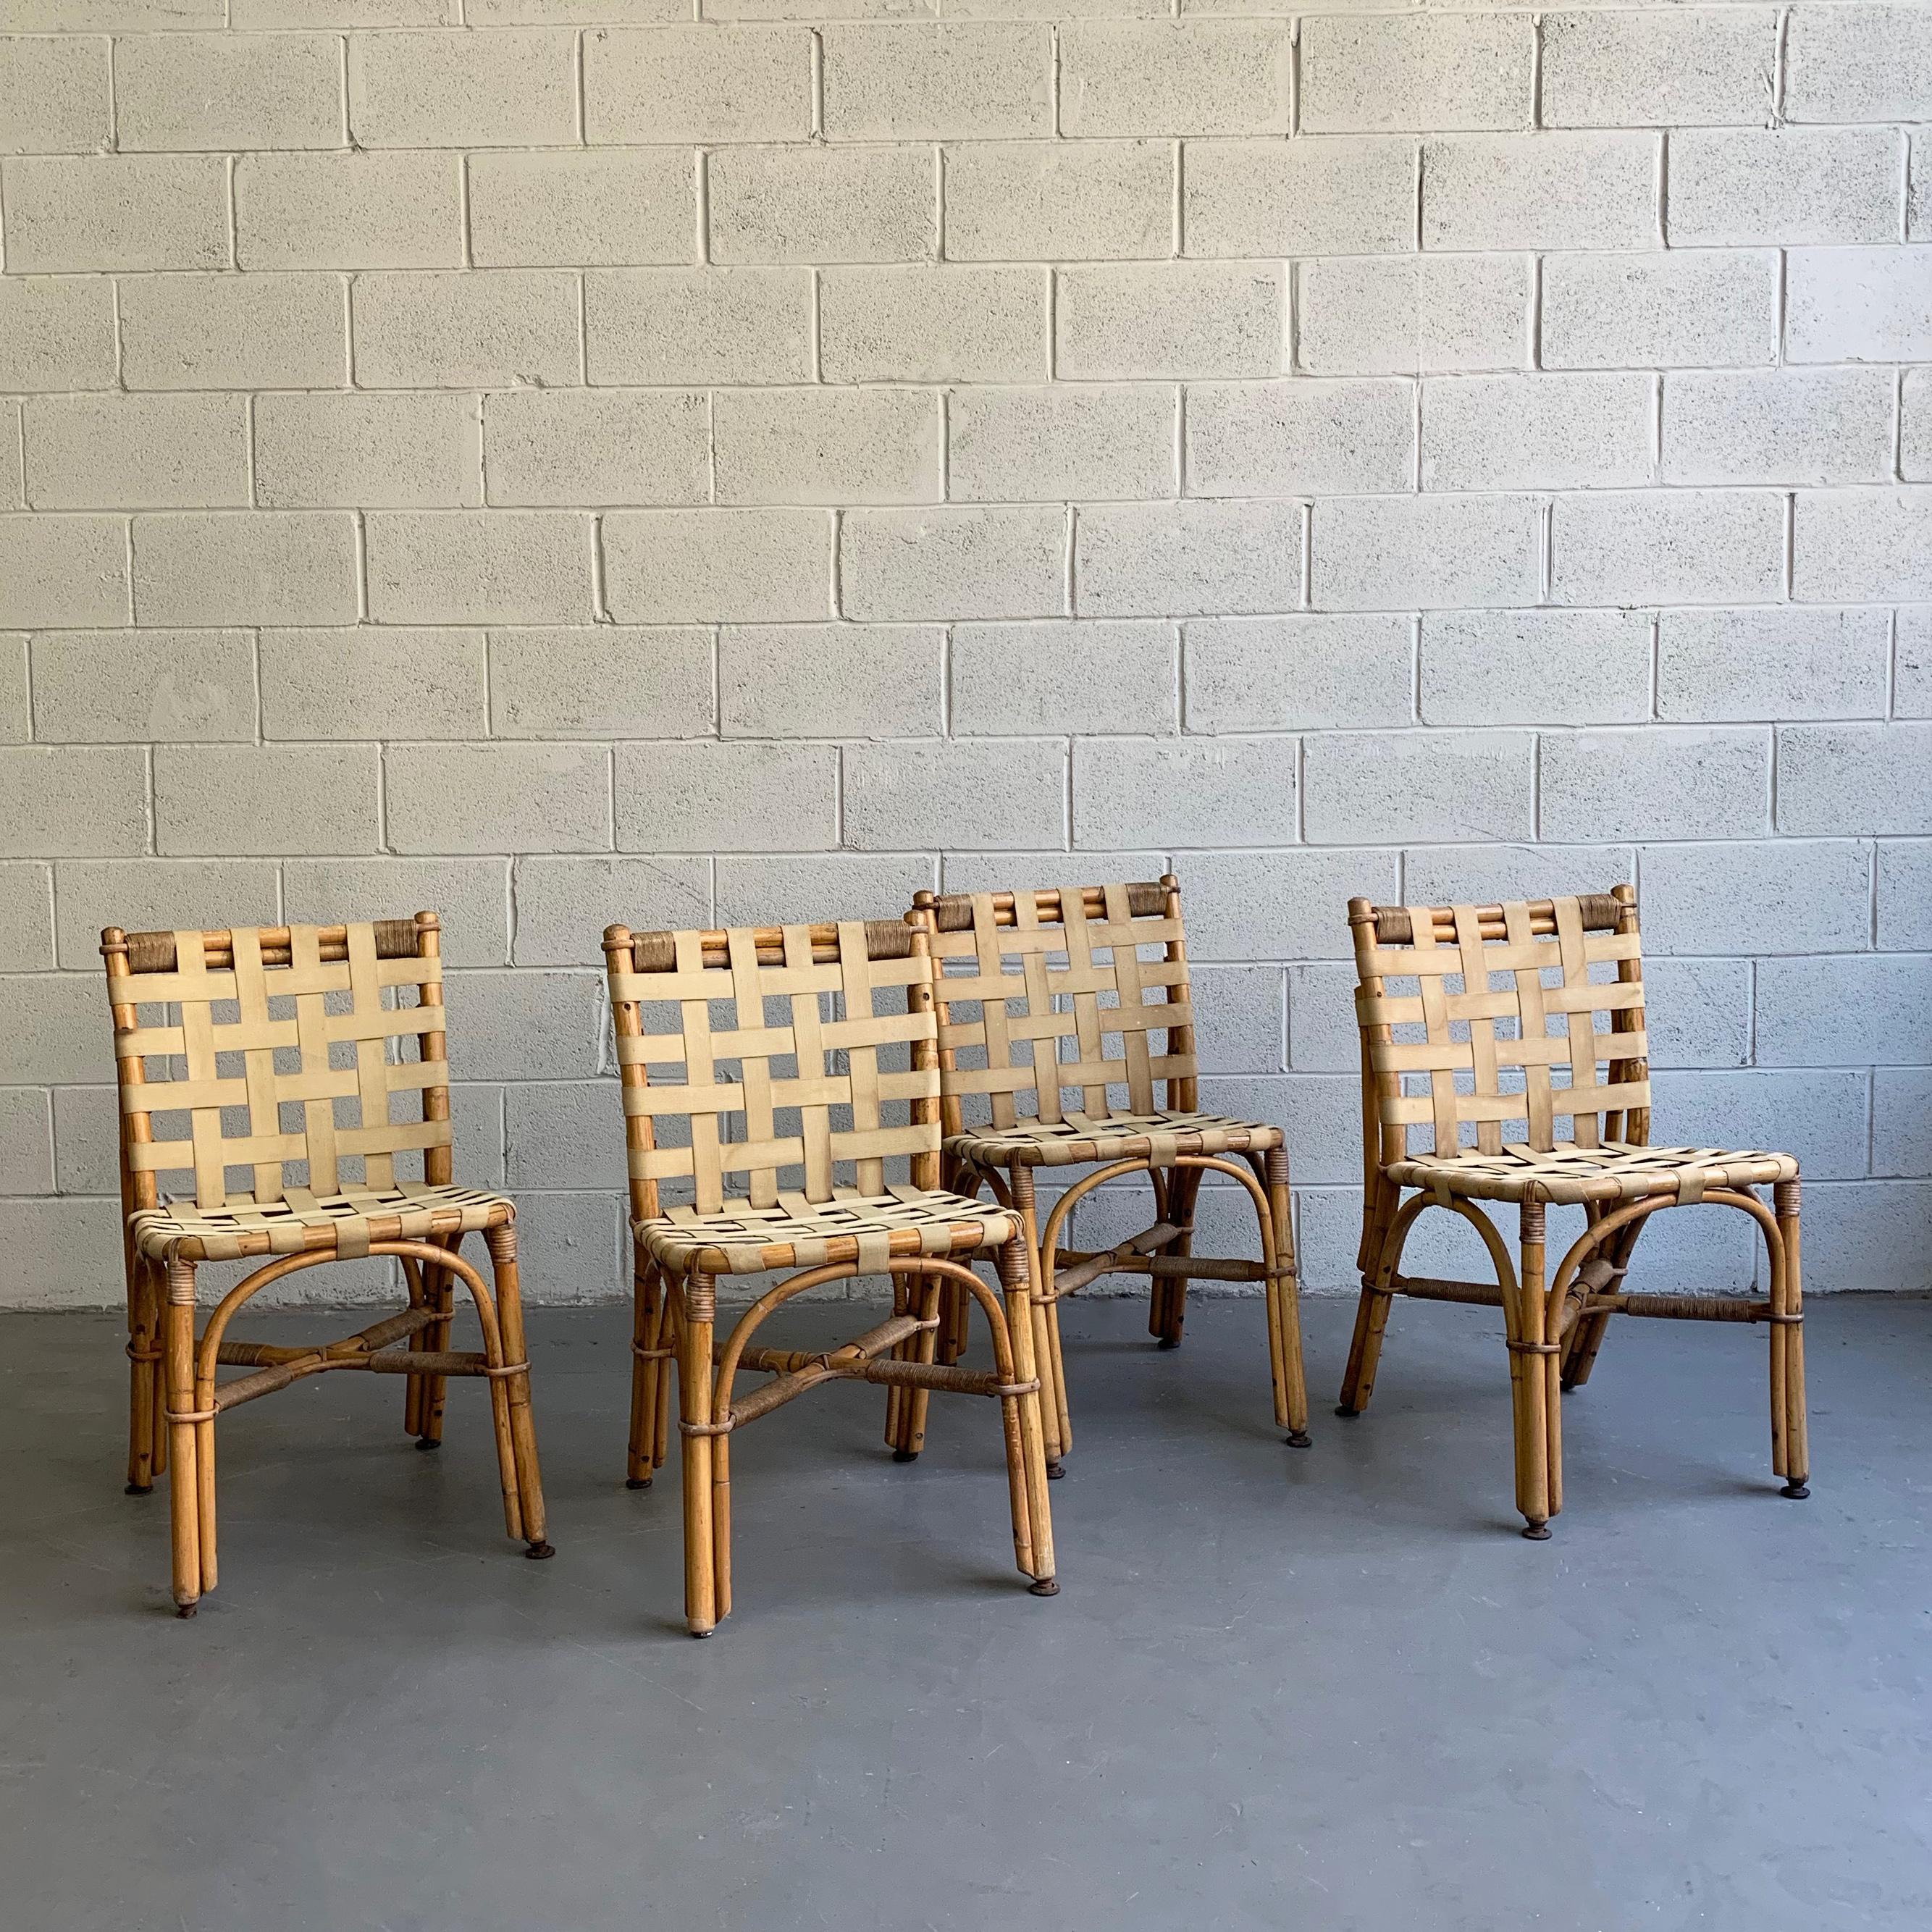 Vintage, rustic, safari chic, bamboo chairs with cotton strap seats and backs by Abercrombie & Fitch.